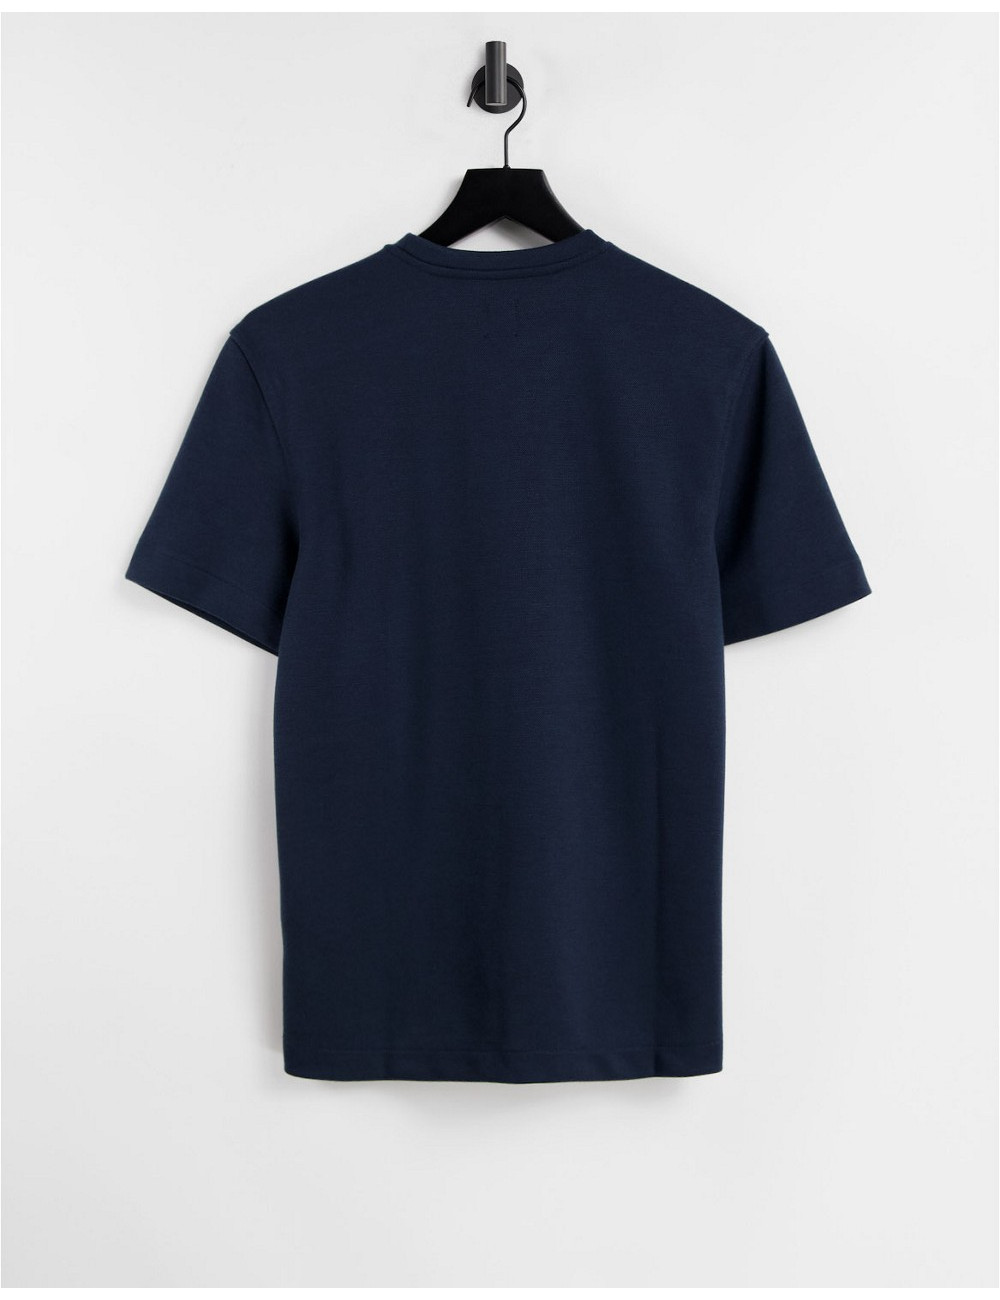 River Island t-shirt in navy